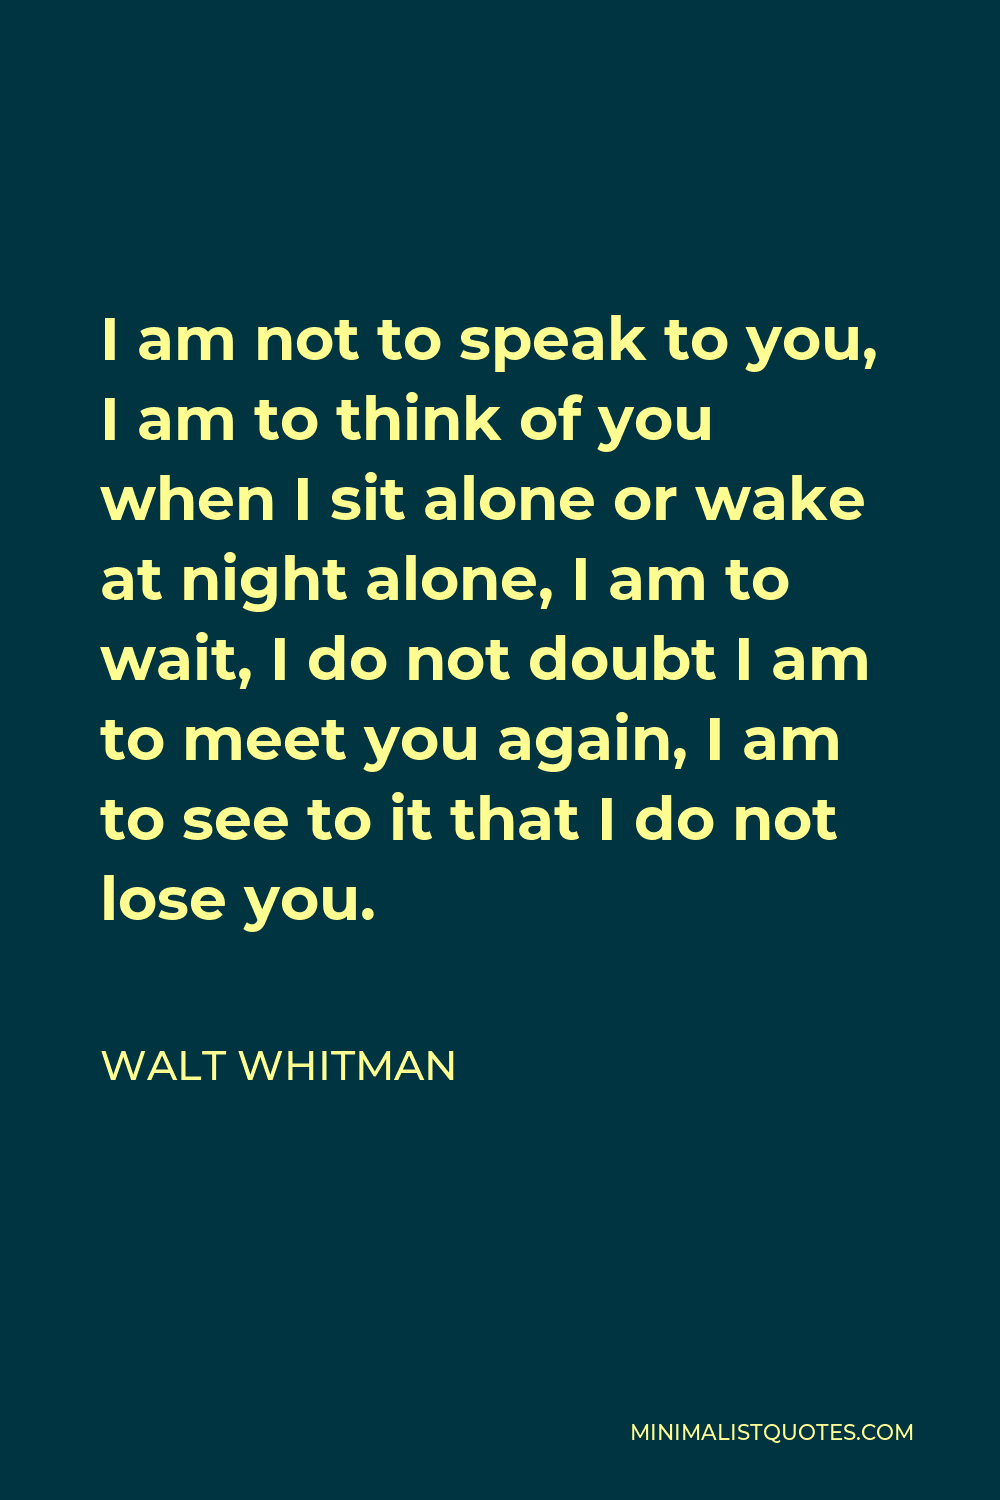 Walt Whitman Quote - I am not to speak to you, I am to think of you when I sit alone or wake at night alone, I am to wait, I do not doubt I am to meet you again, I am to see to it that I do not lose you.